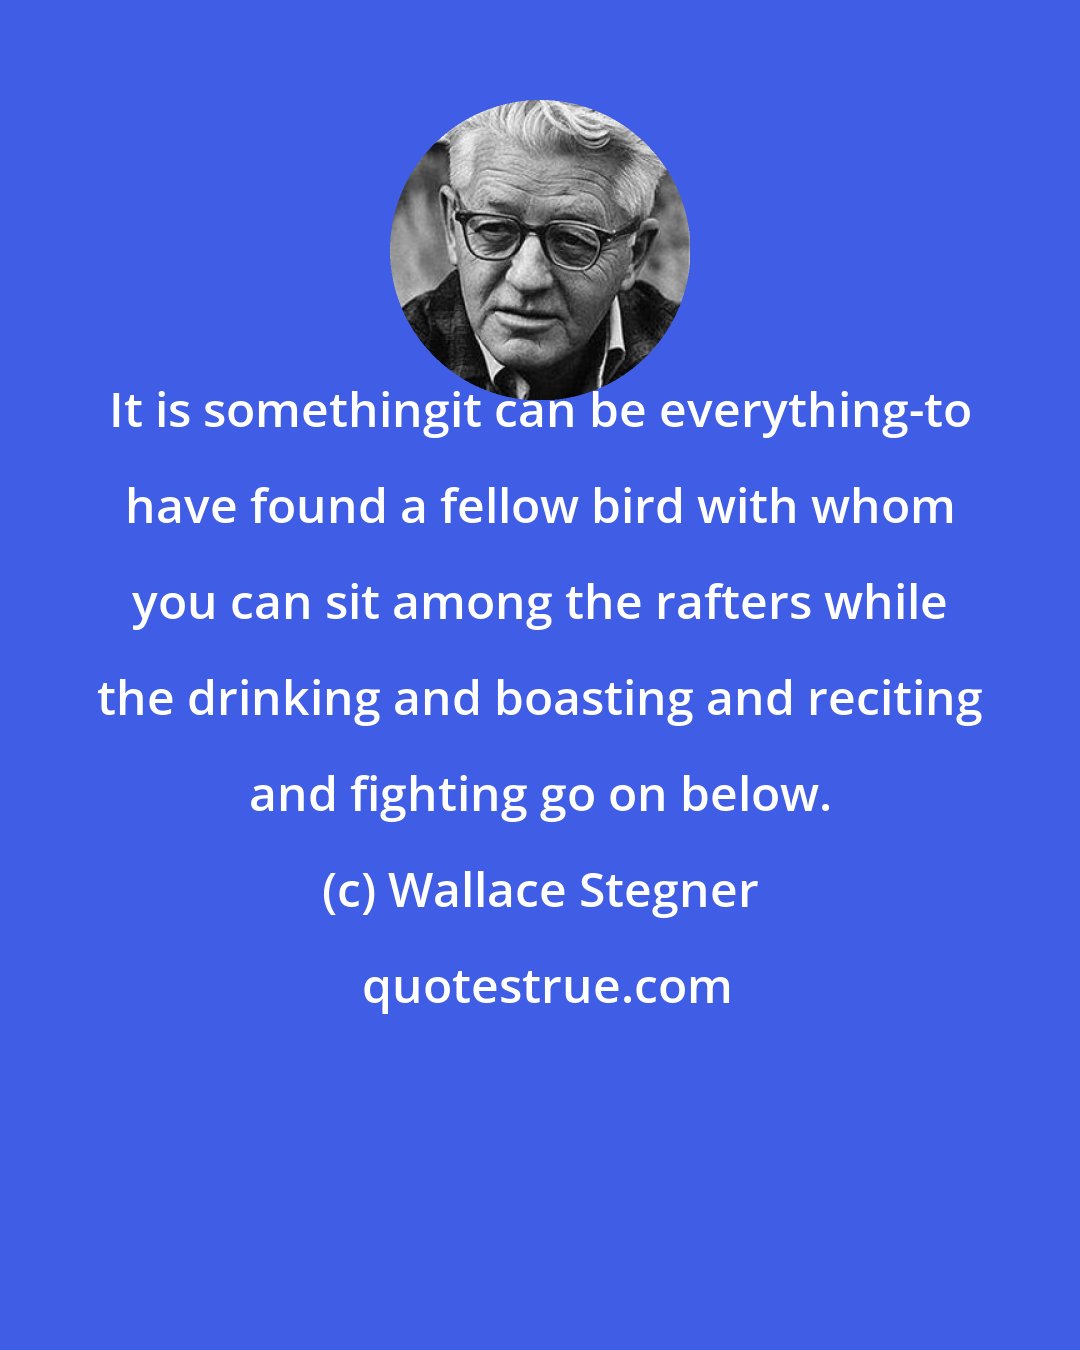 Wallace Stegner: It is somethingit can be everything-to have found a fellow bird with whom you can sit among the rafters while the drinking and boasting and reciting and fighting go on below.